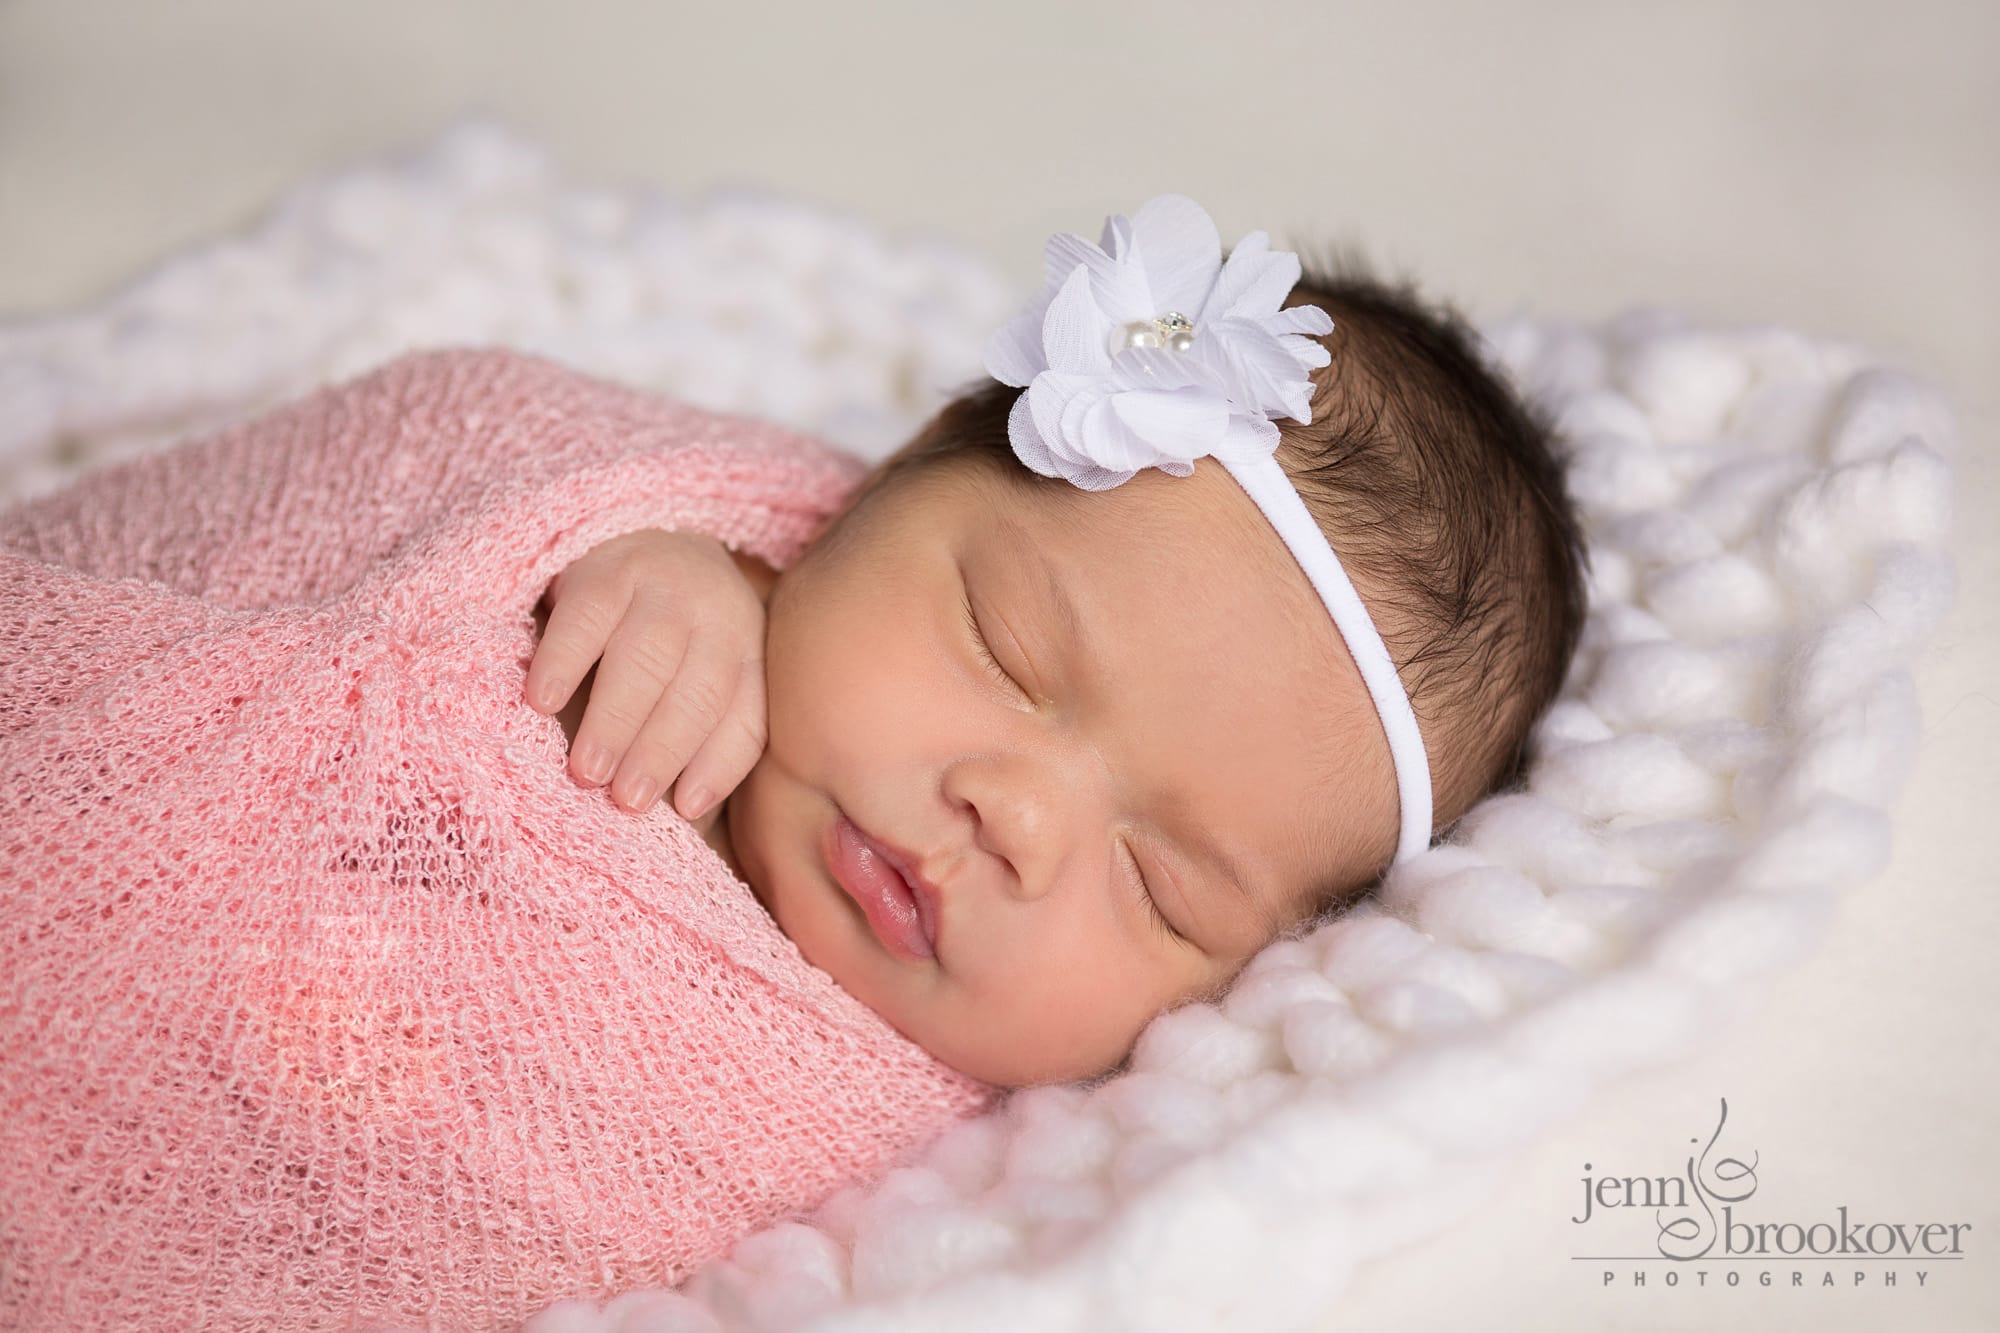 newborn wrapped in pink with white flower headband during her photo shoot with Jenn Brookover in San Antonio